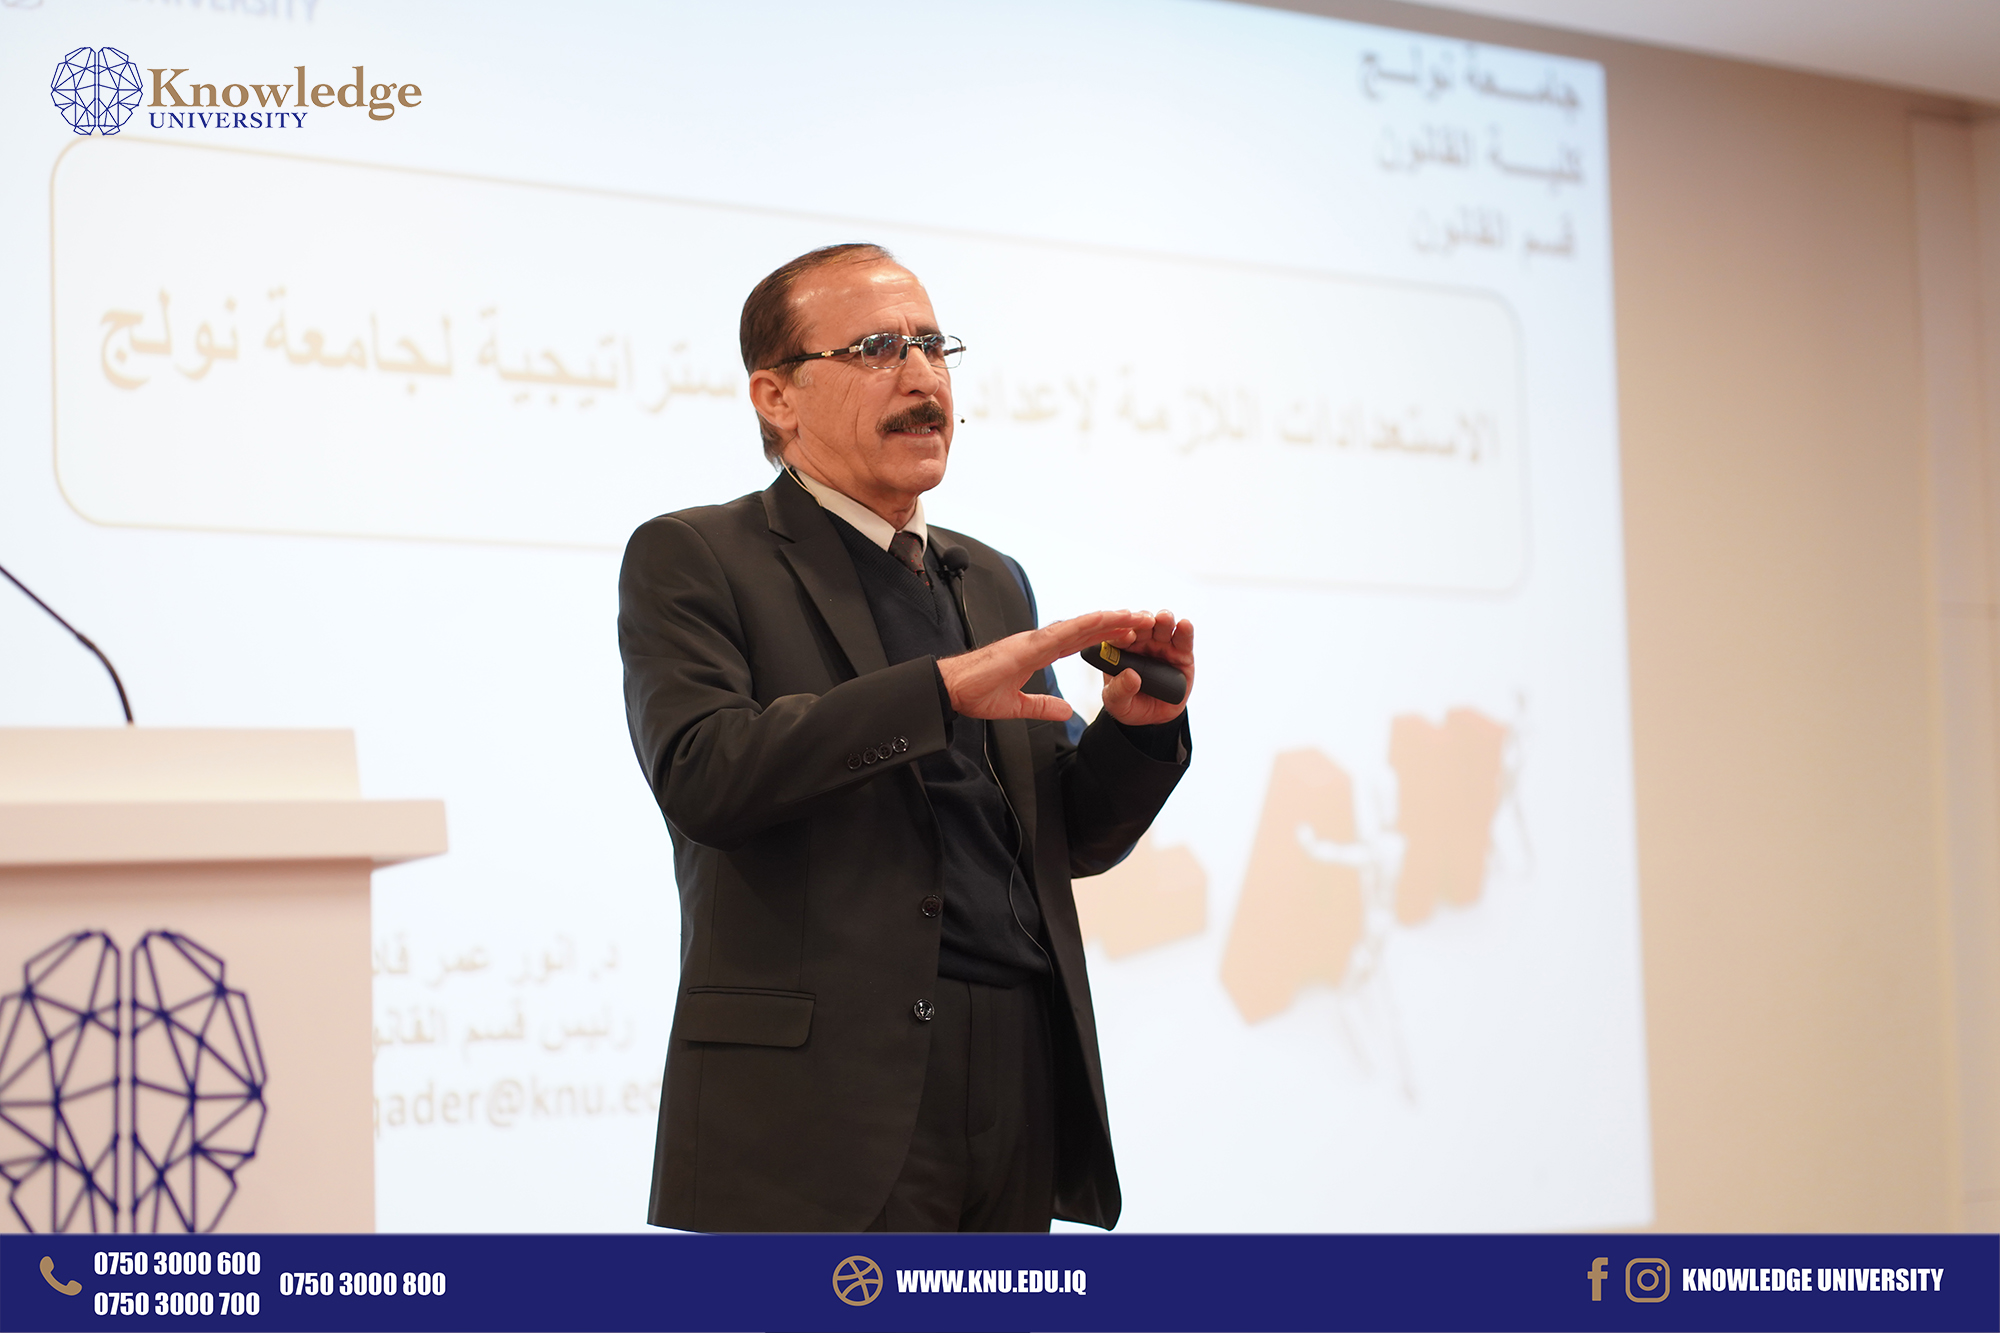 Strategic Planning Seminar at Knowledge University: Paving the Path to Excellence